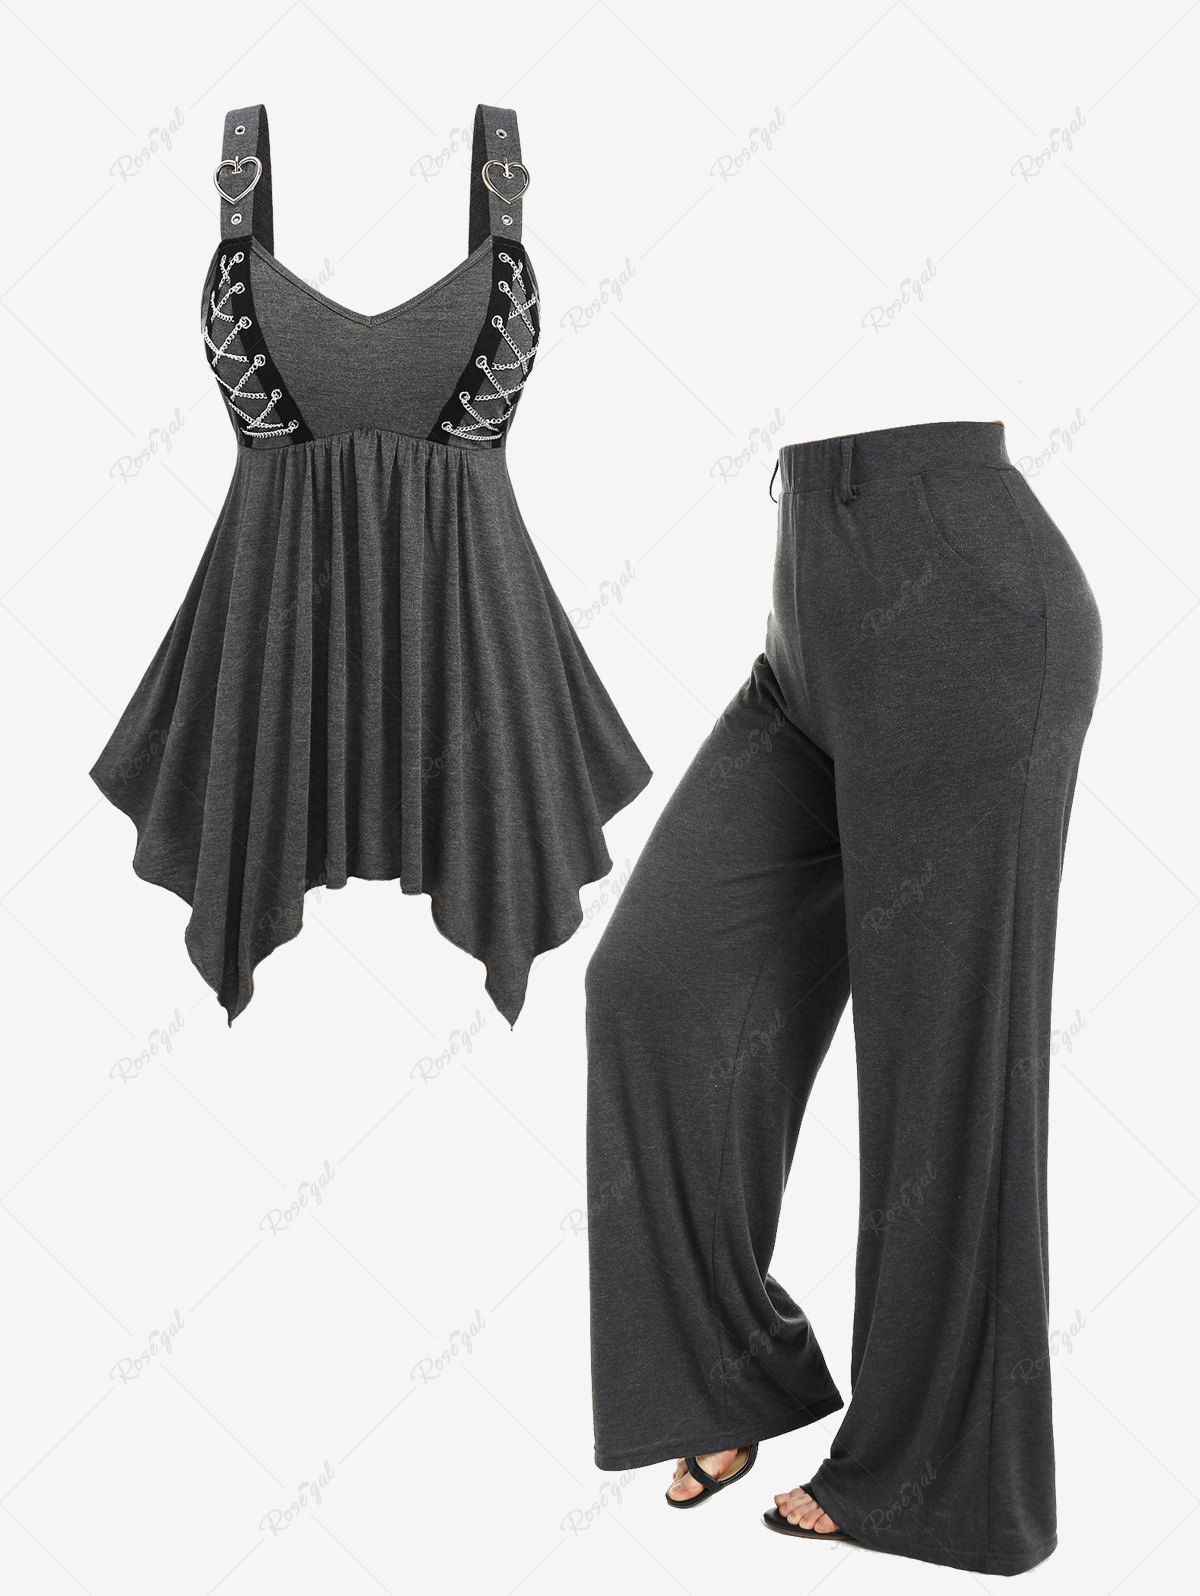 New Chains Braided Heart Buckle Handkerchief Tank Top and Wide Leg Pull On Pants Plus Size Outfits  